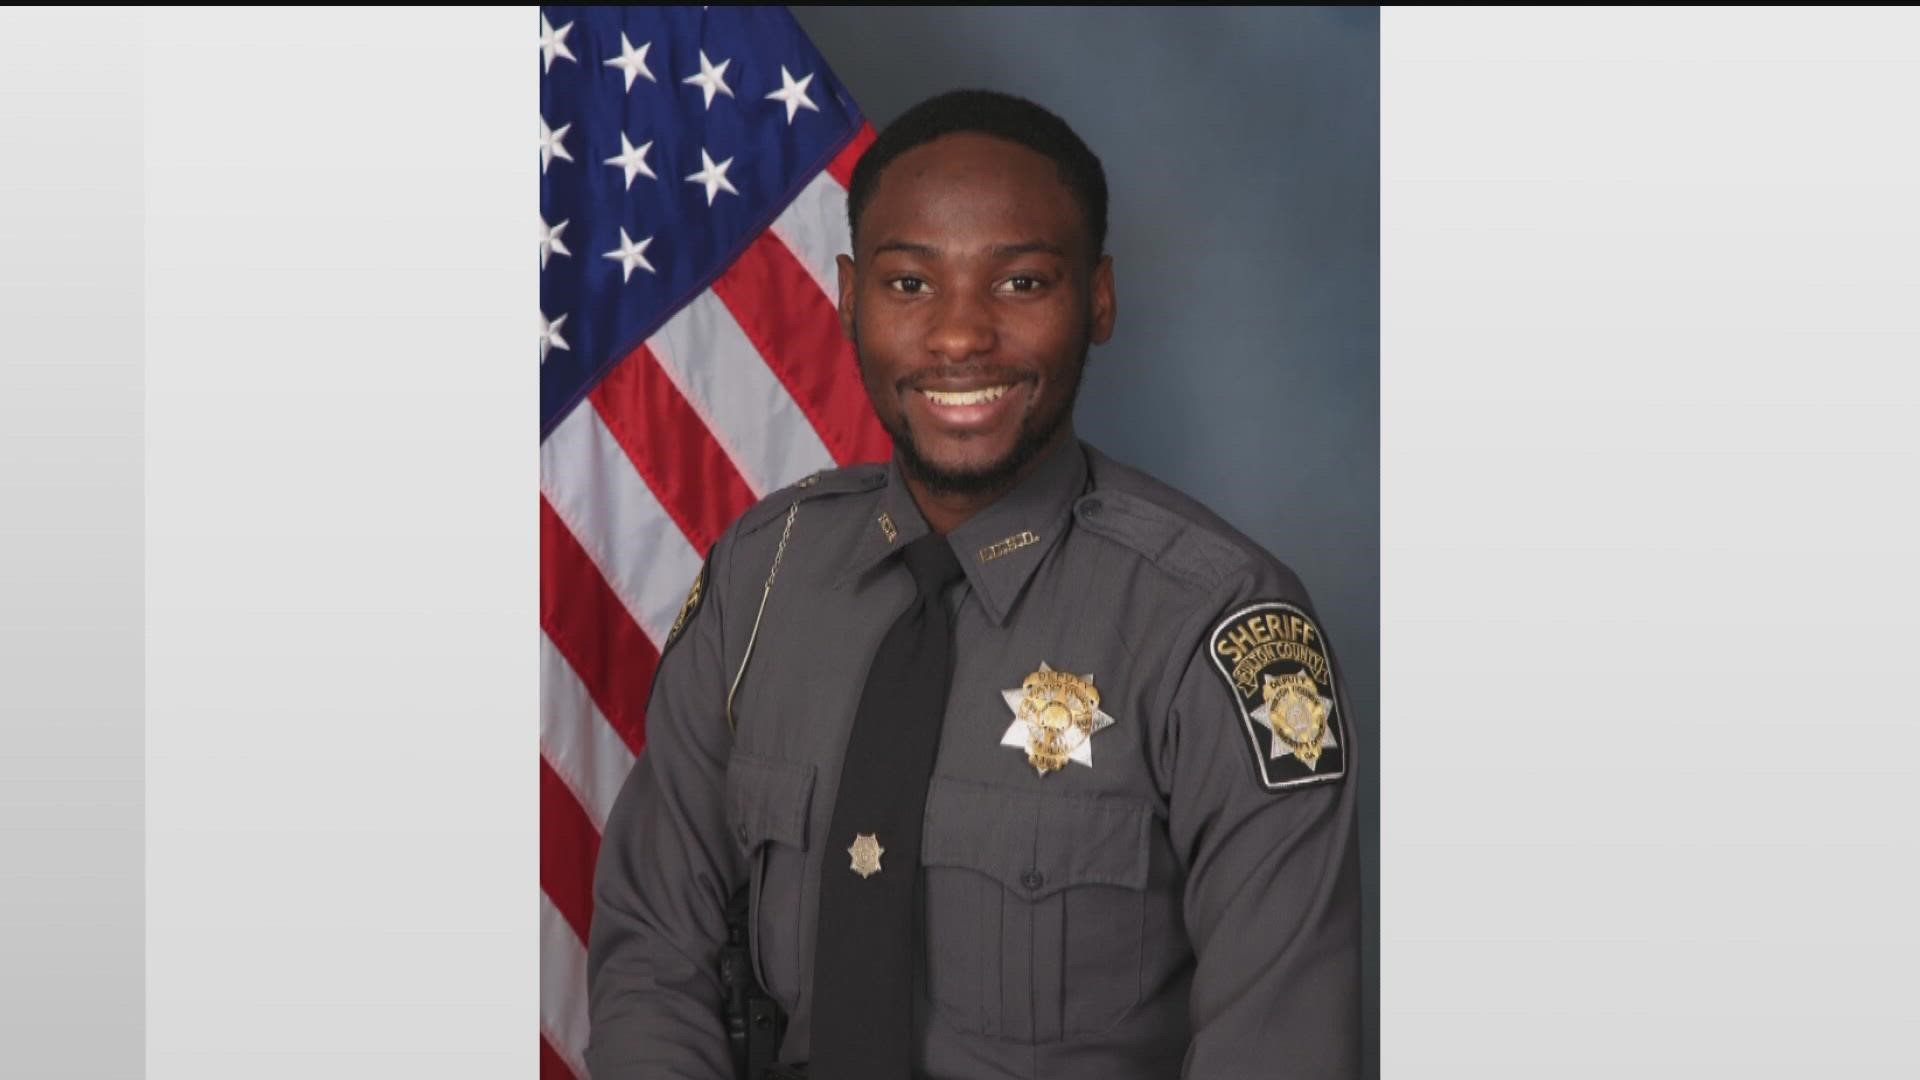 The community is pausing to remember a fallen deputy described as an "outstanding young man."